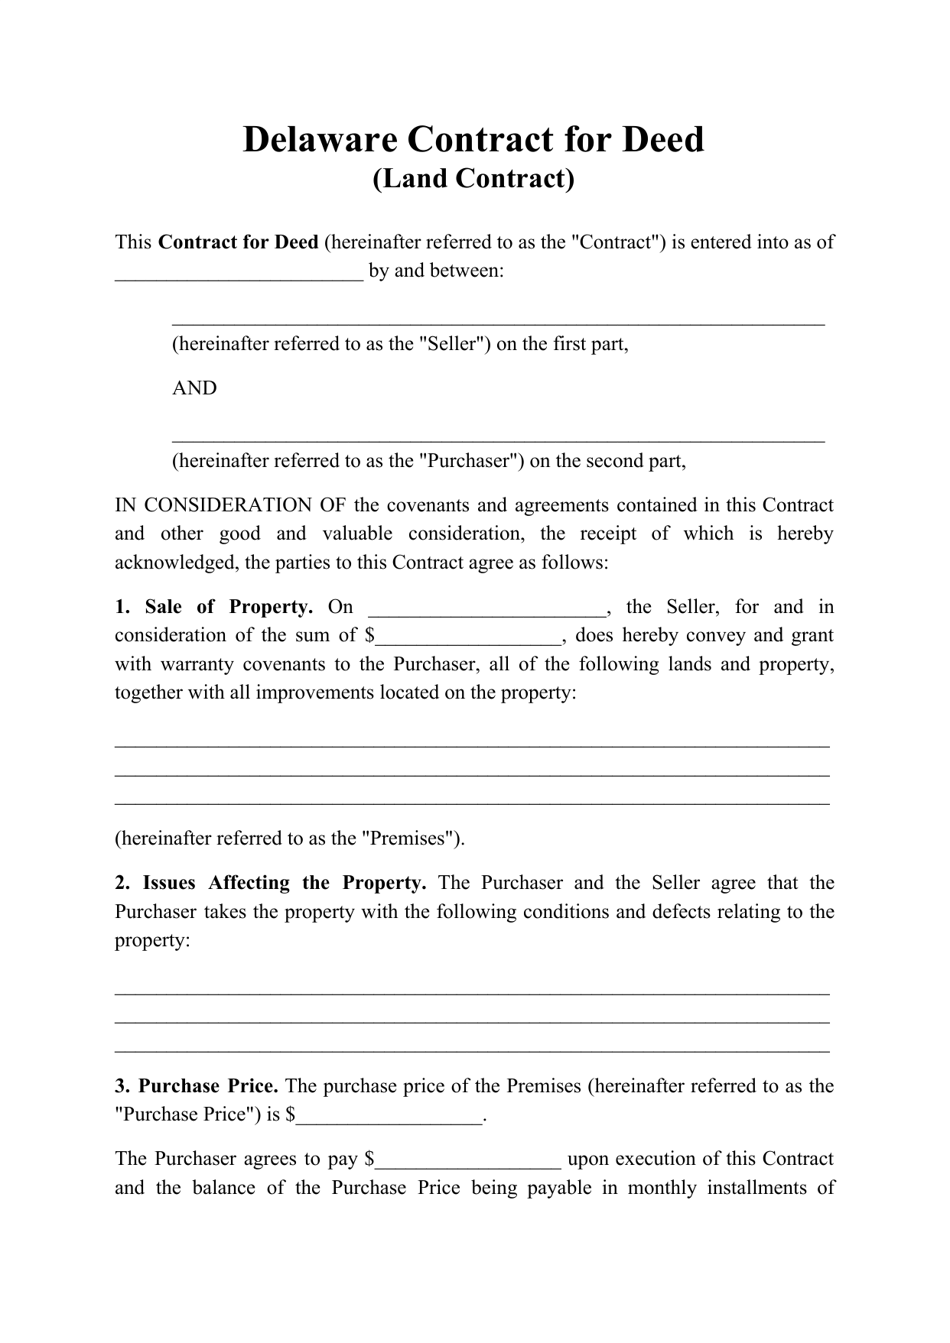 Contract for Deed (Land Contract) - Delaware, Page 1